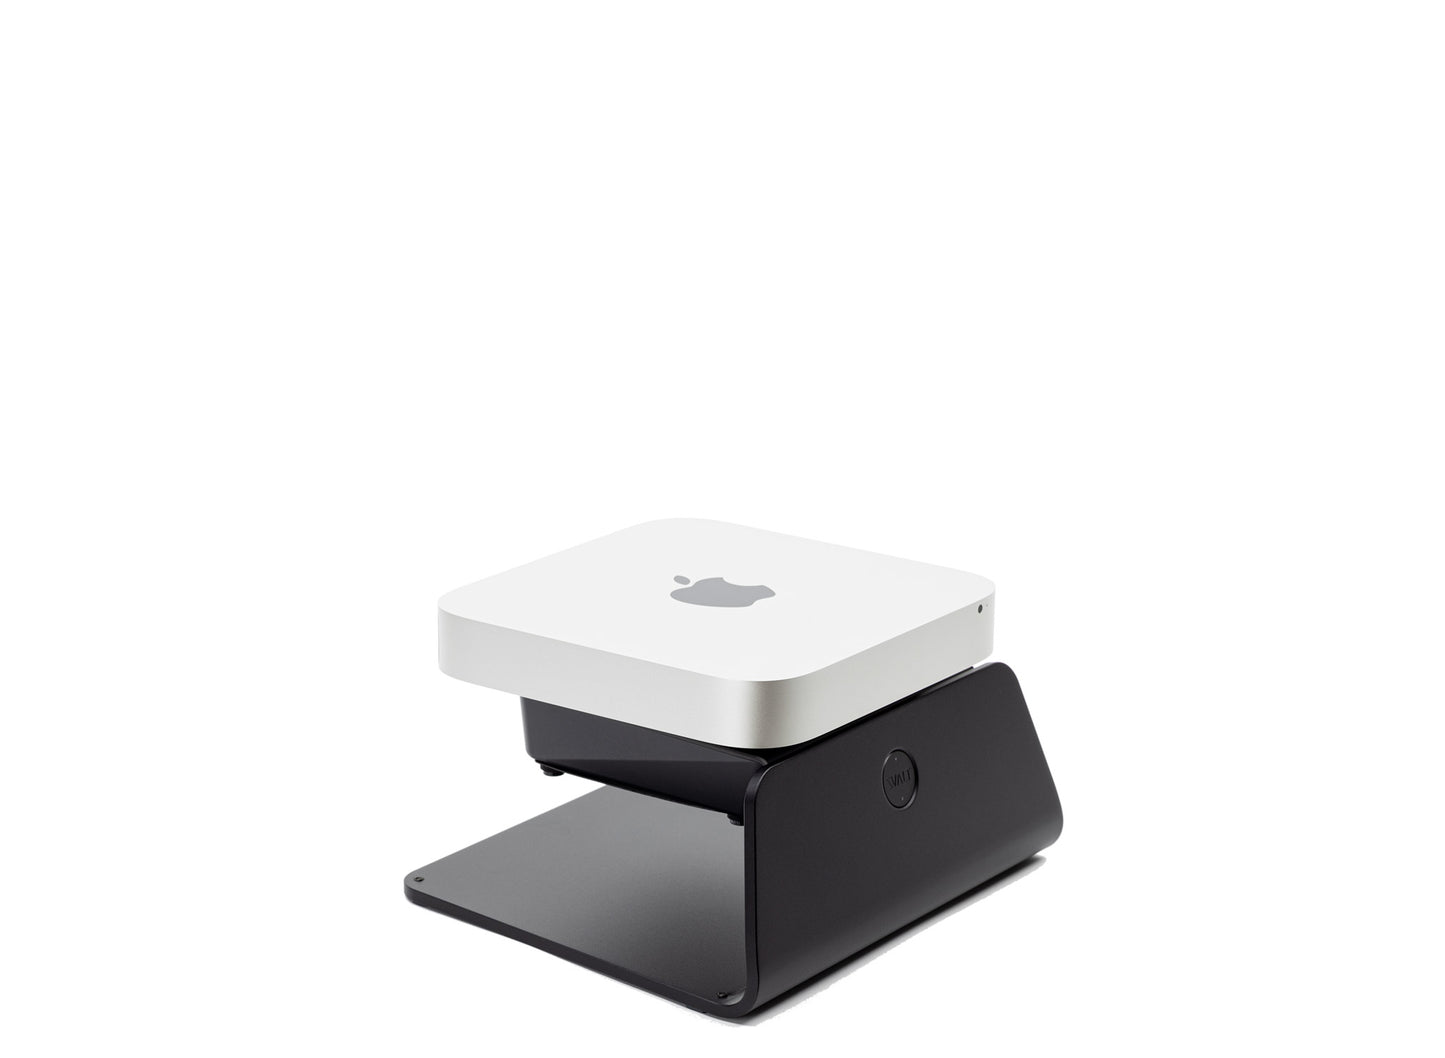 SVALT Cooling Stand model SxB14M black front top side view for quiet fan cooling performance with Apple Mac Mini